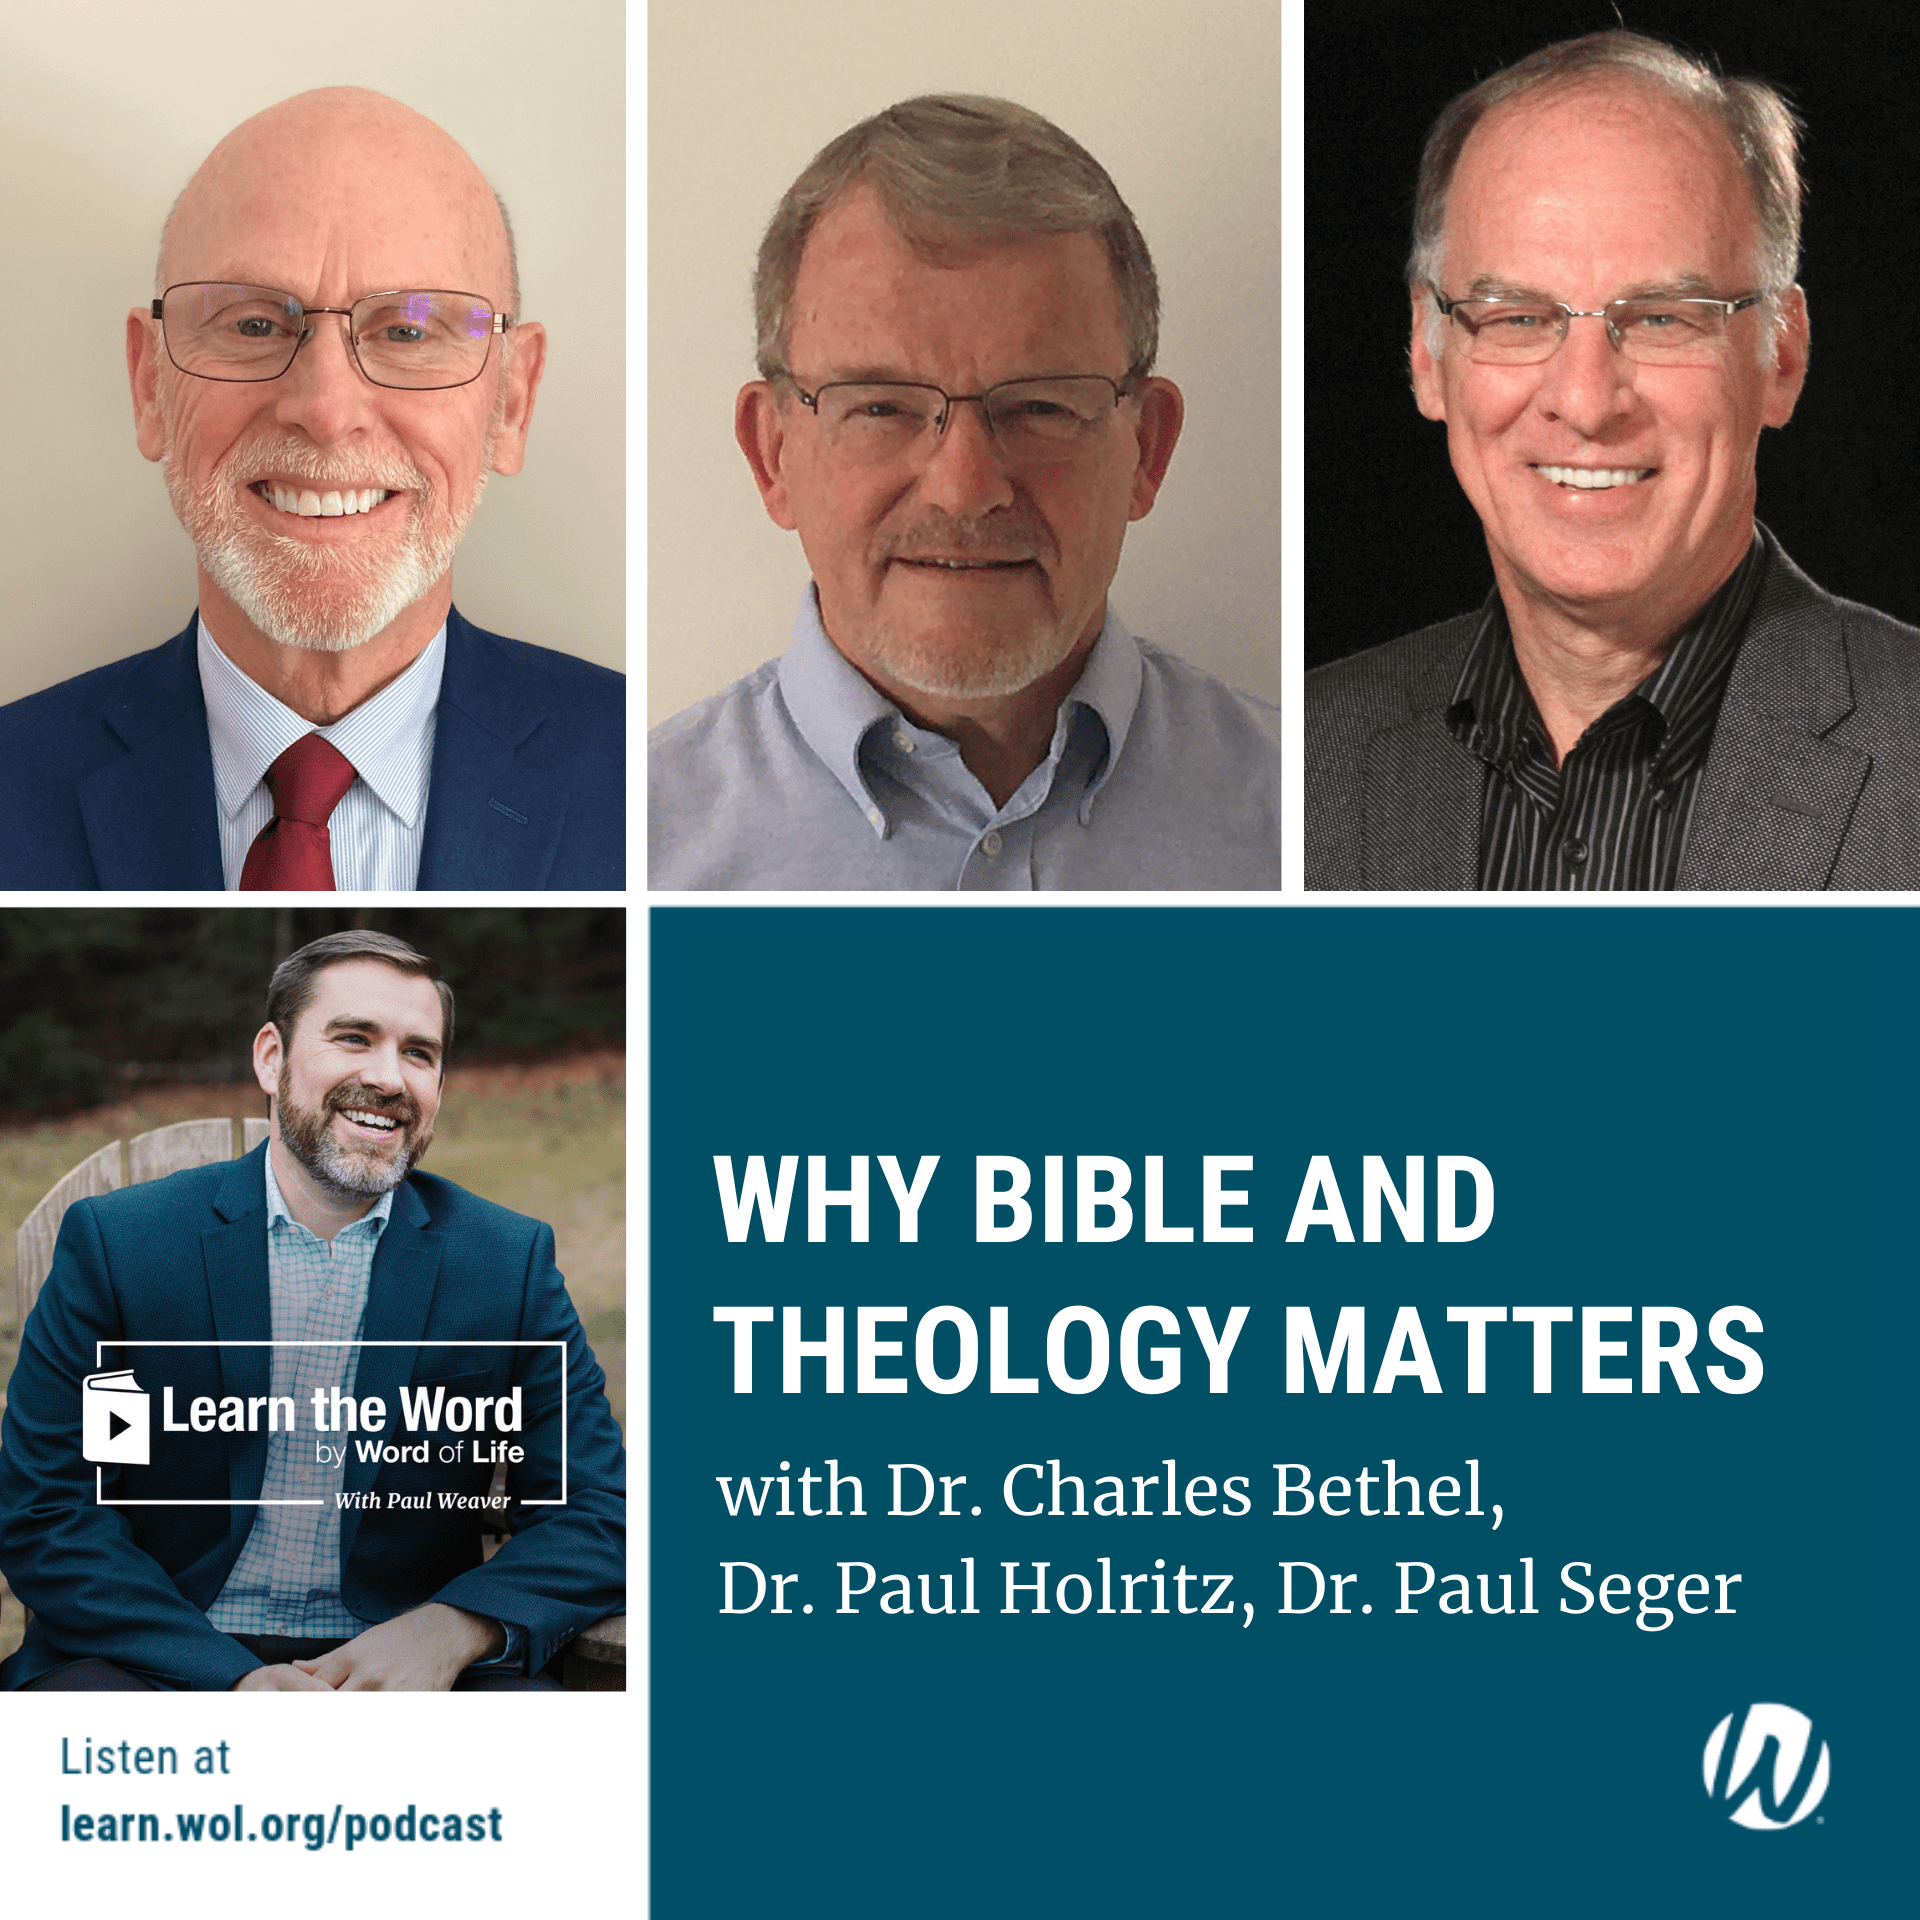 LTW201 - Why Bible and Theology Matters: Part 1 with Dr. Charles Bethel, Dr. Paul Holritz, Dr. Paul Seger